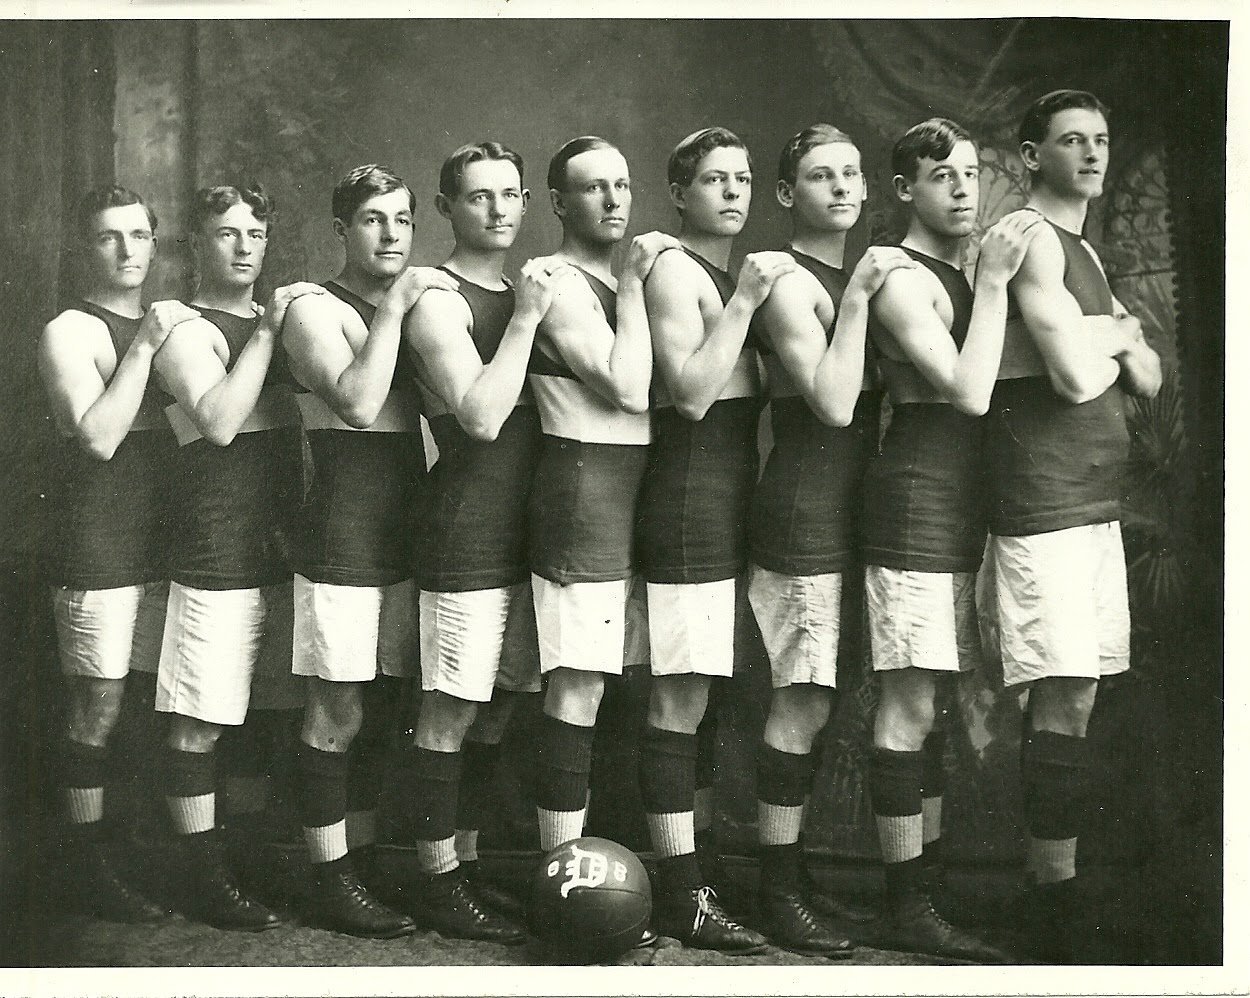 Old Sports Before Technology - Vintage Photos | Briff.Me